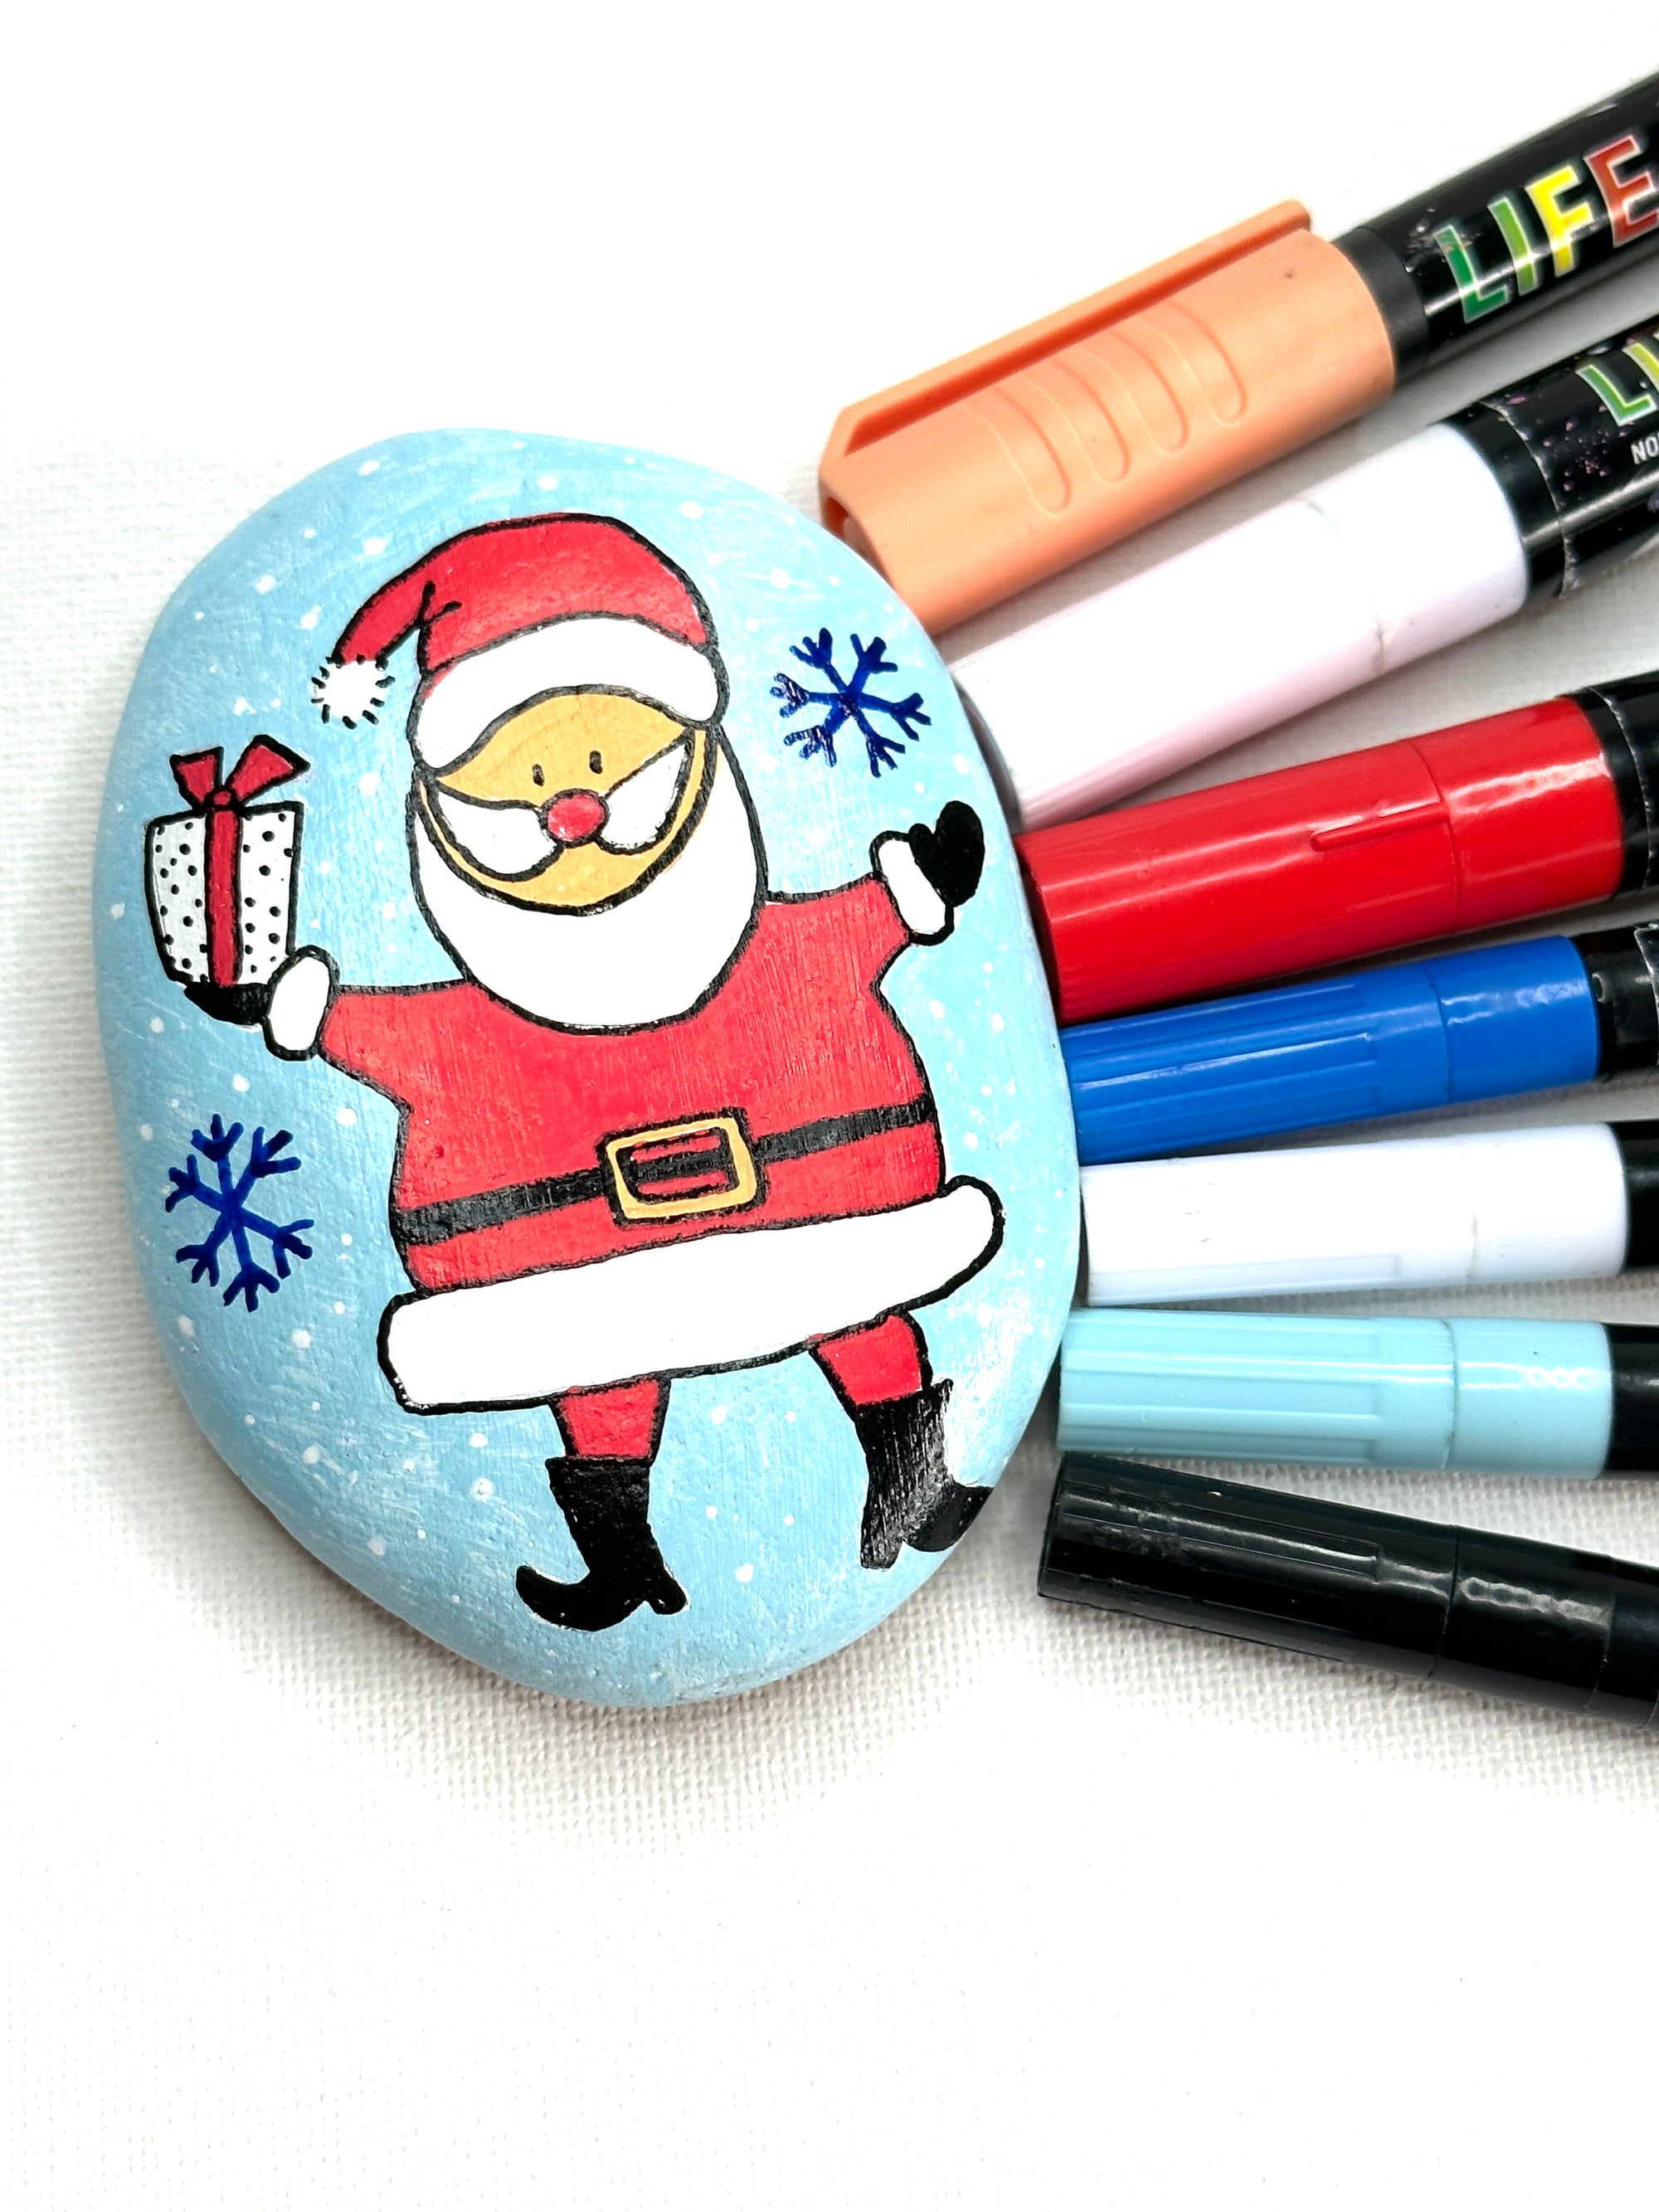 24 days of Colourful Christmas Crafts